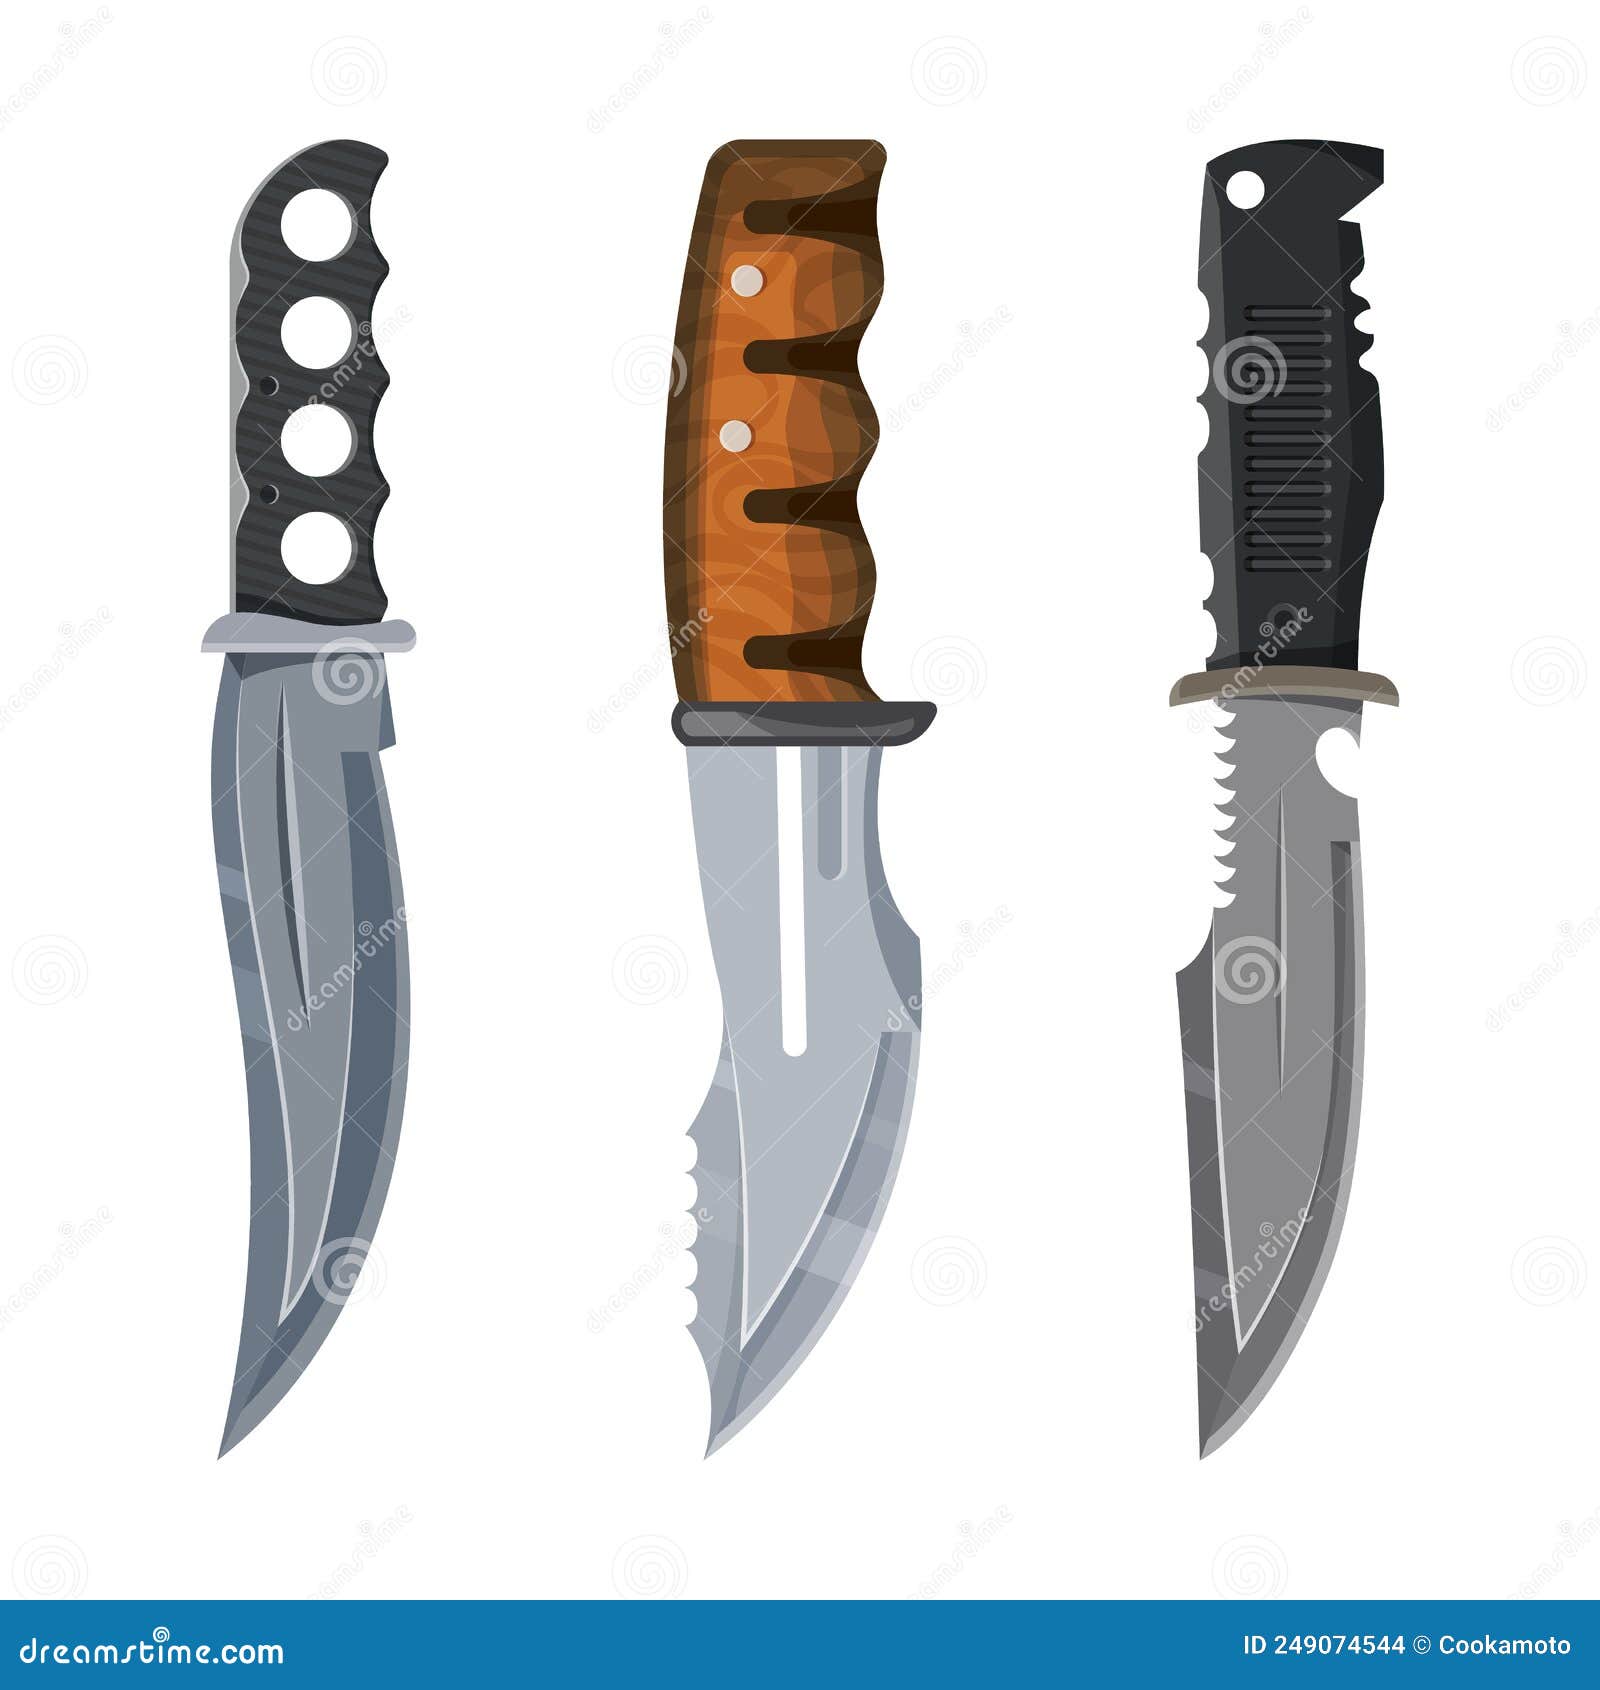 Knife, Combat Daggers and Military Blade Weapons Stock Vector ...